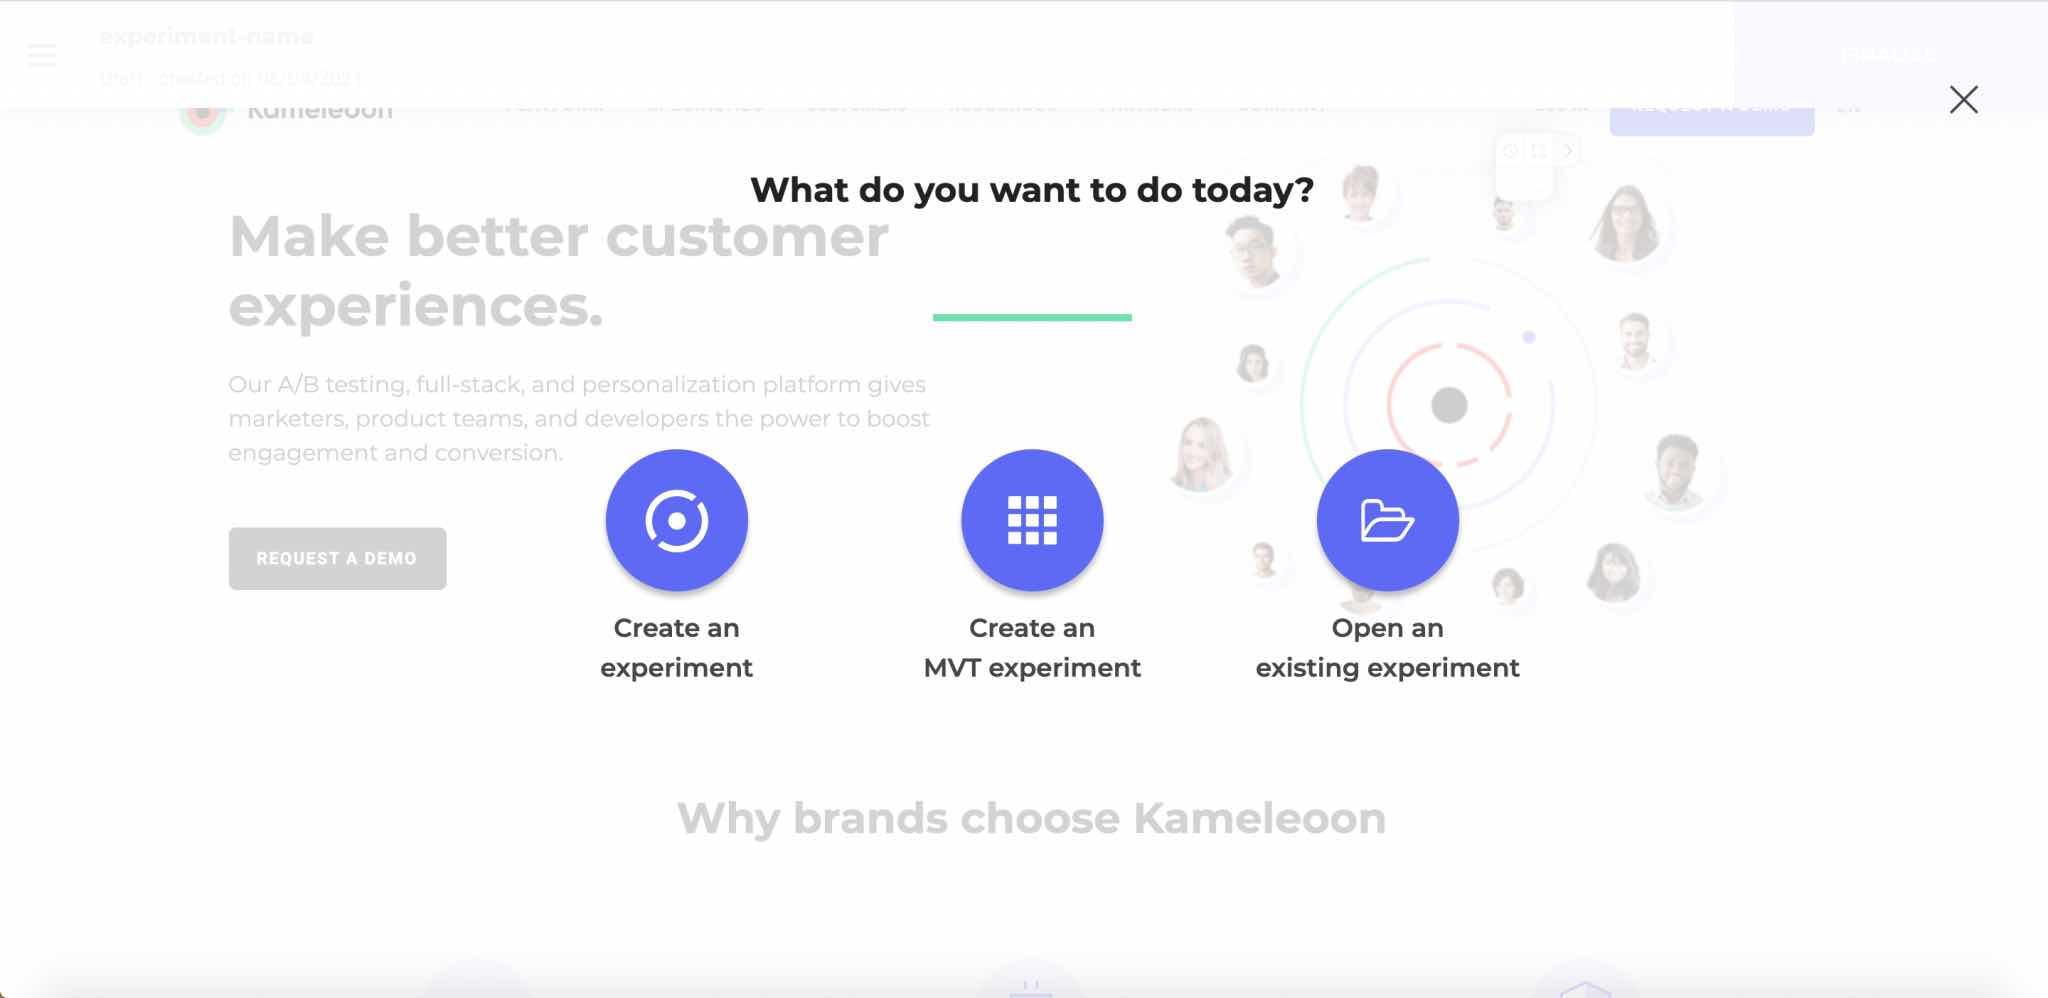 How to create an experiment from Kameleoon A/B testing platform